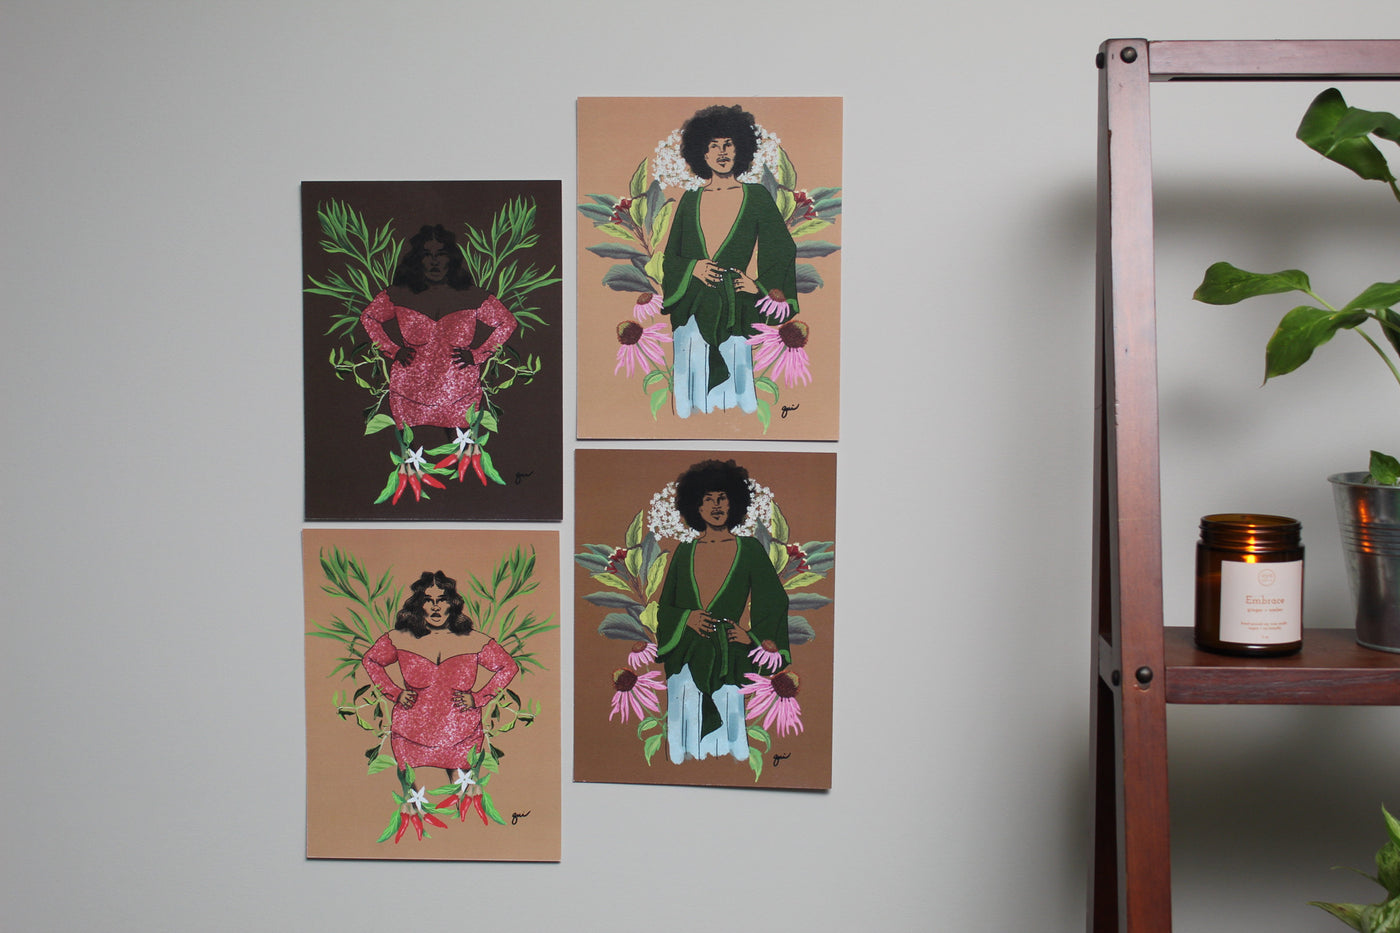 shows 4 arts prints on wall together. two of them are the dream girl art print and two of them are the elder art print.